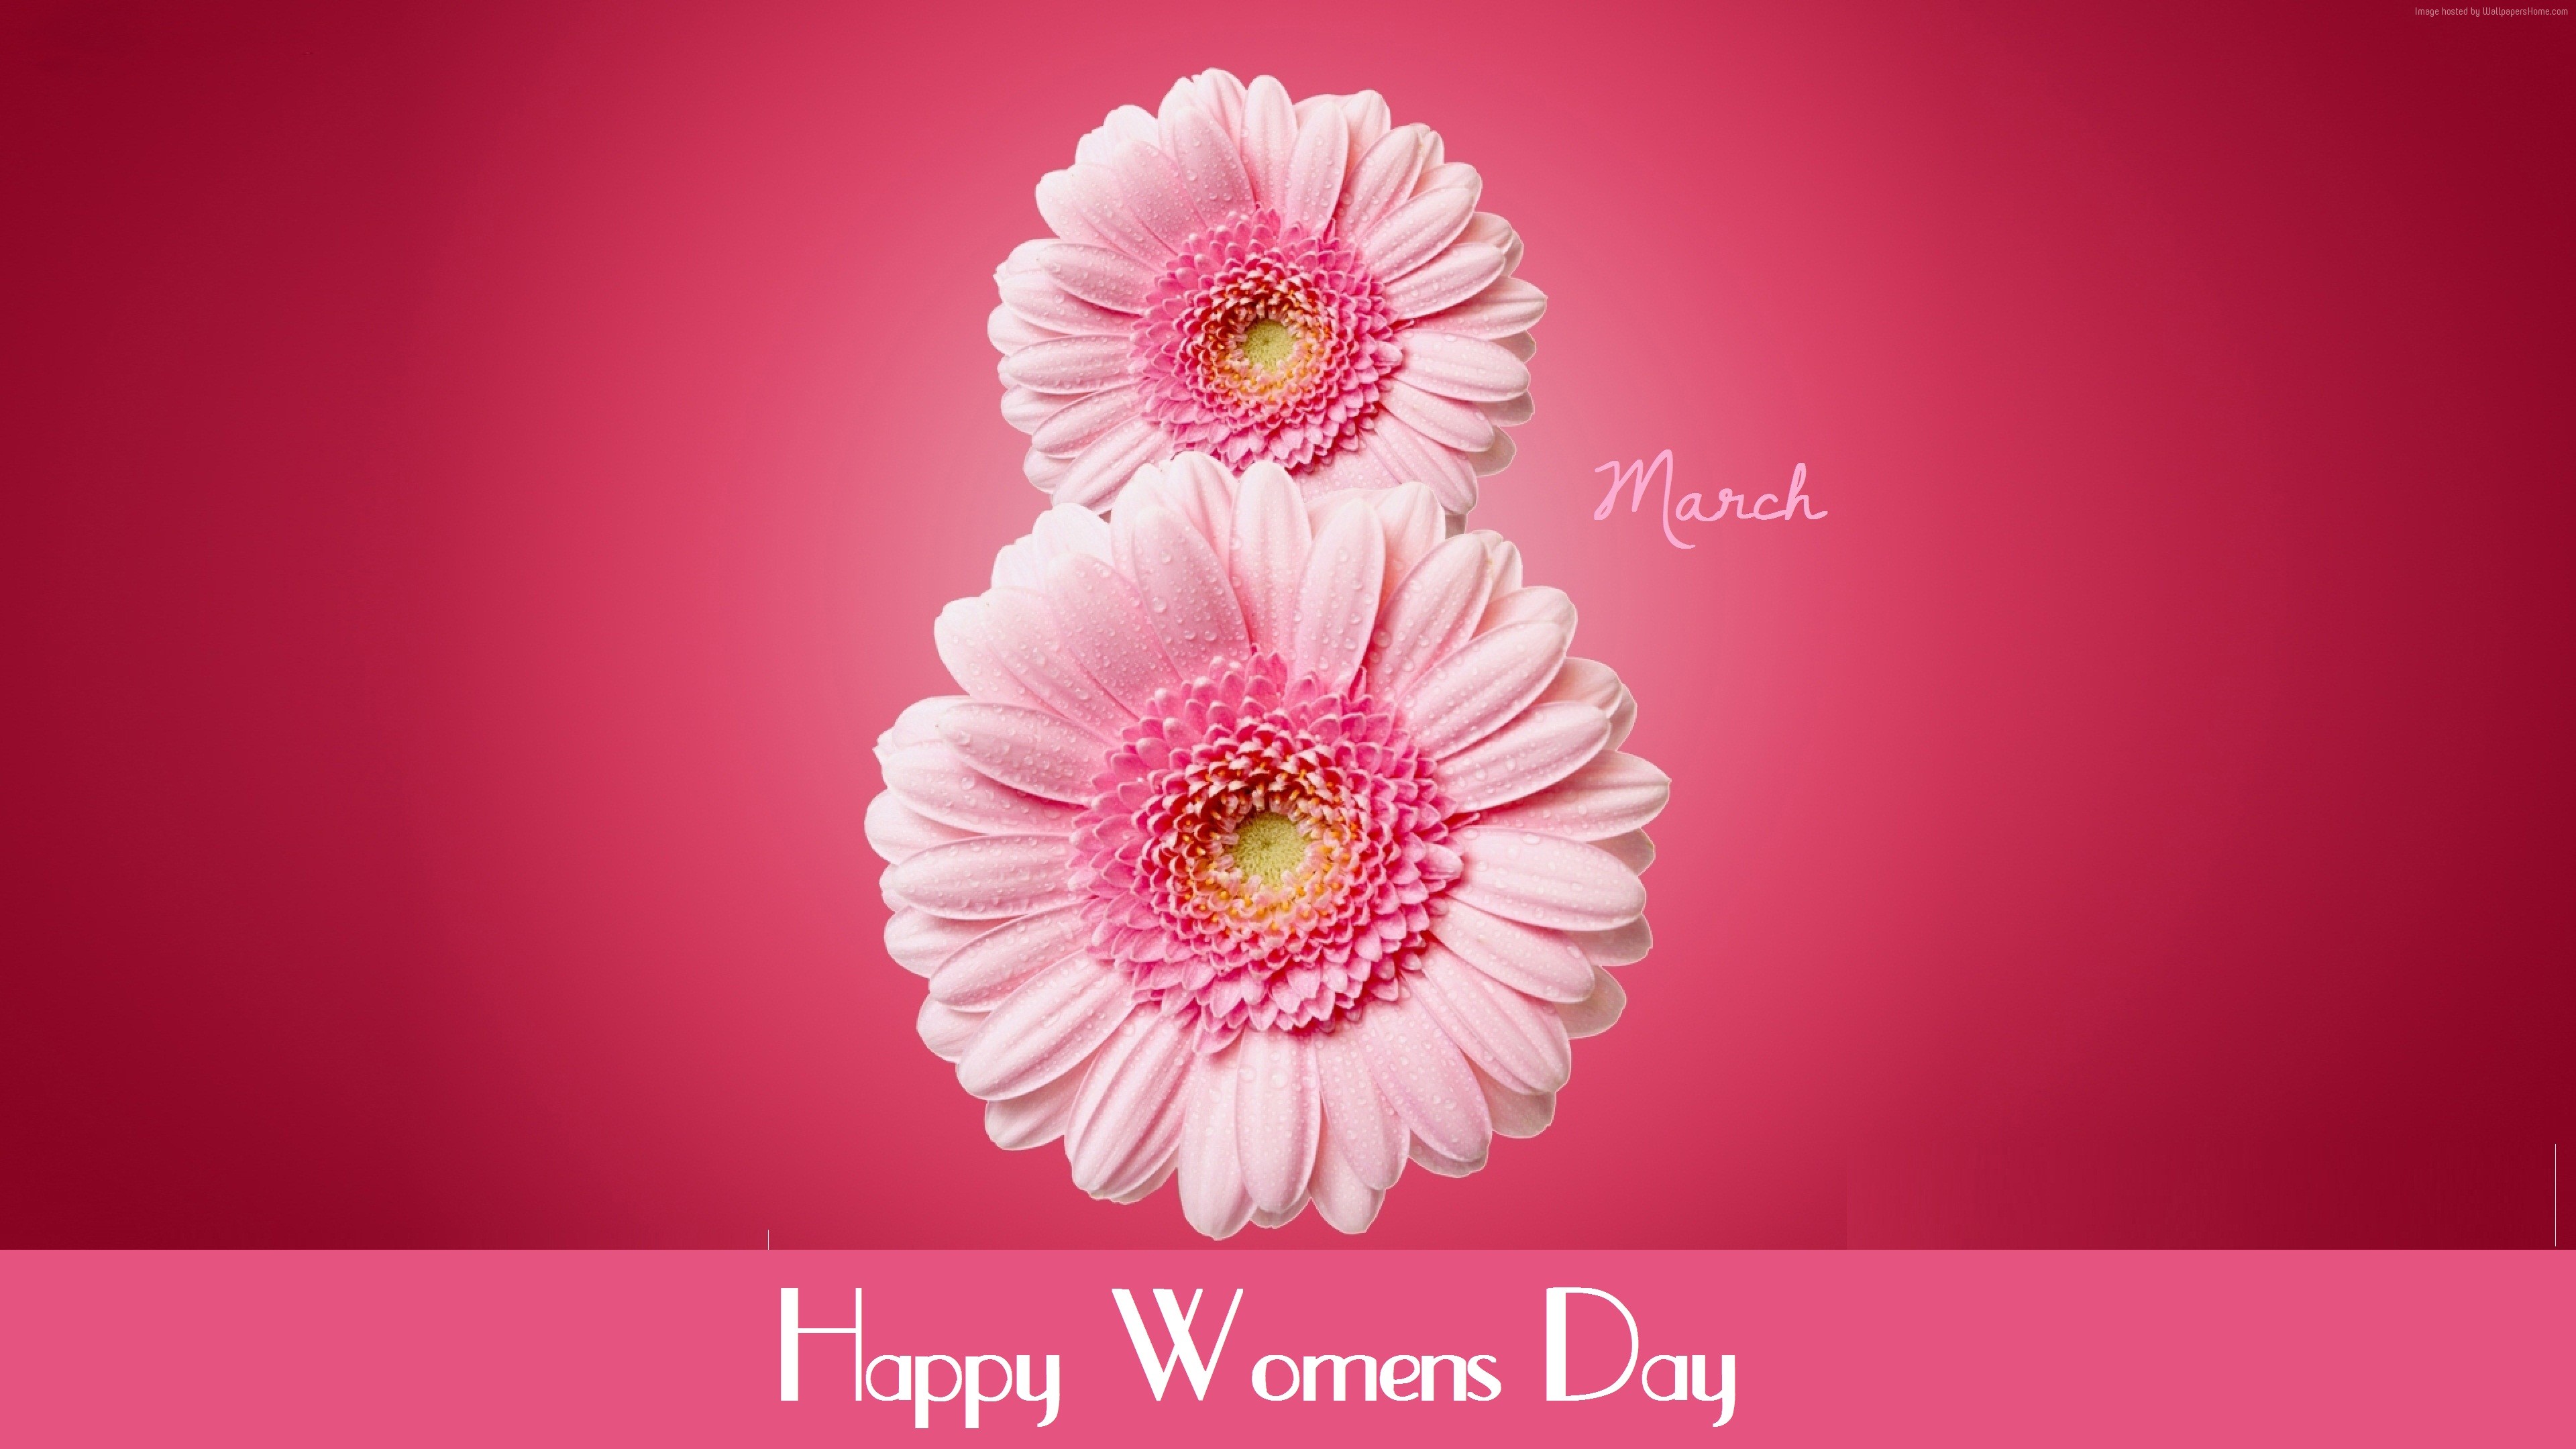 Original Resolution Popular - Happy Women's Day 2019 Quotes , HD Wallpaper & Backgrounds